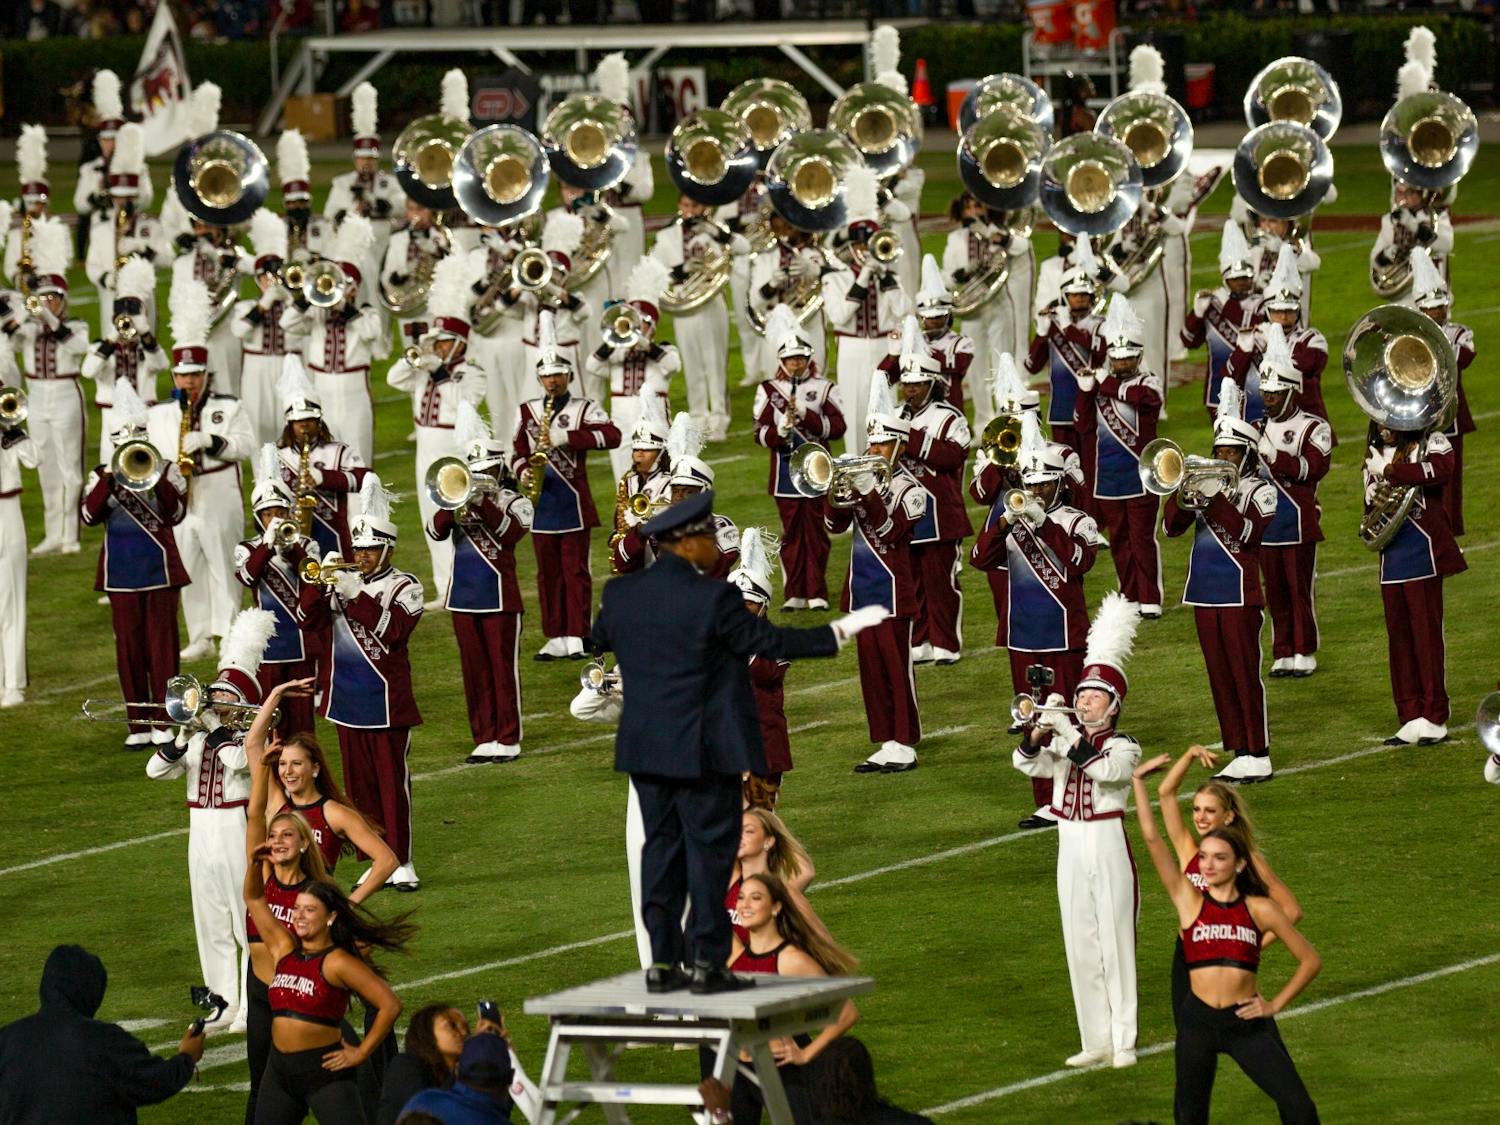 The University of South Carolina and South Carolina State marching bands join together for a rendition of &nbsp;“Ain't no Mountain High Enough" during the halftime show on Sept. 29, 2022. The Gamecocks beat the Bulldogs 50-10.&nbsp;